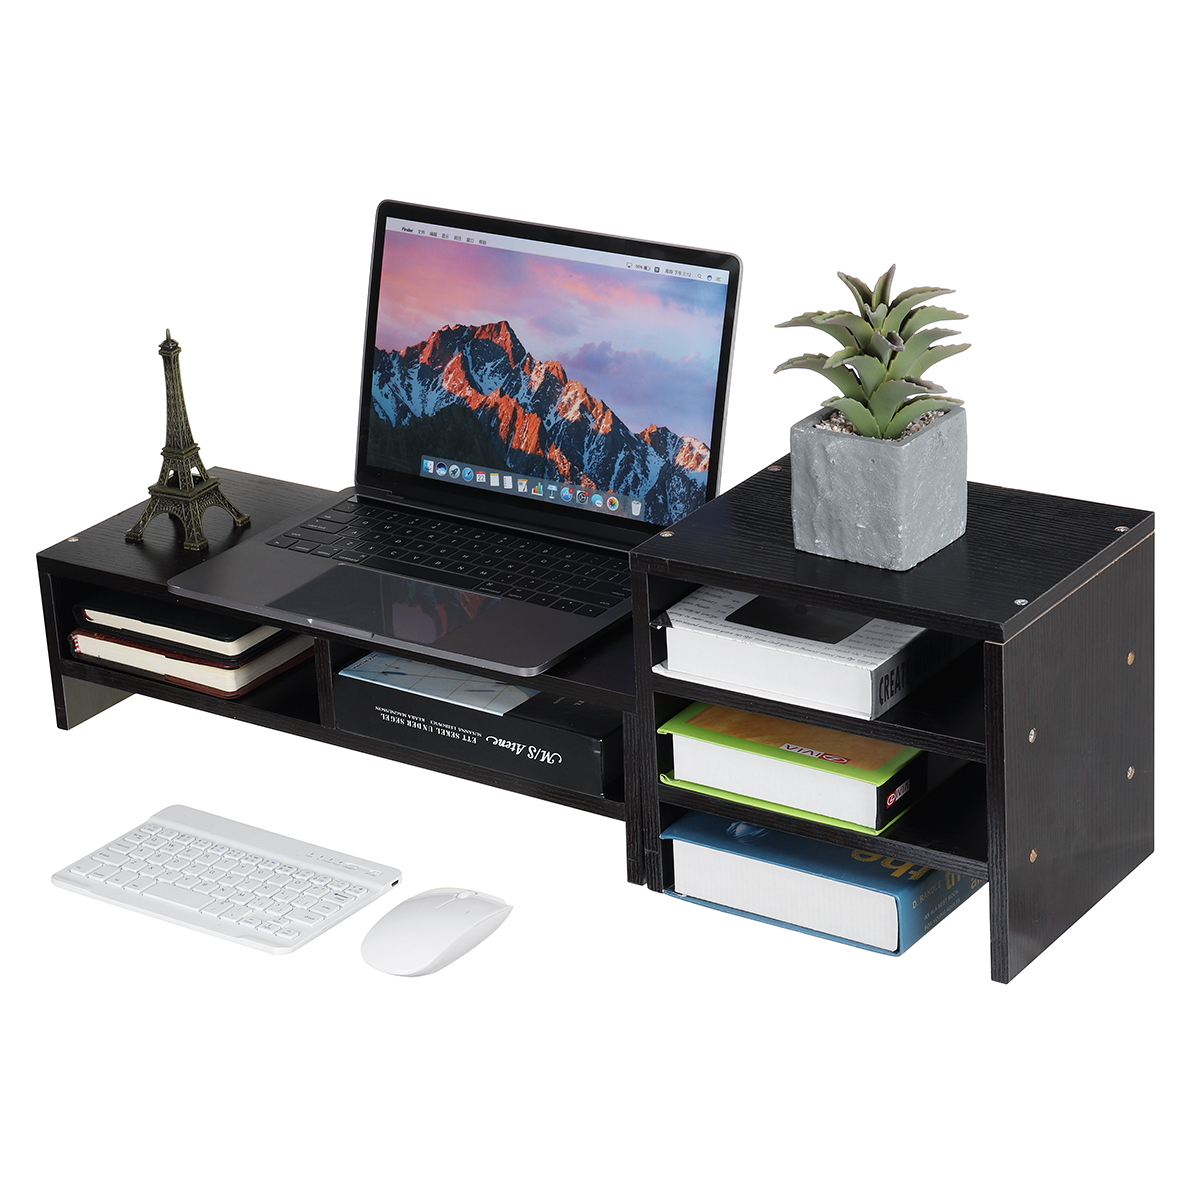 Computer-Monitor-Riser-Desktop-LED-LCD-Laptop-Monitor-Support-Stand-Desktop-Organizer-with-Storage-R-1794731-9